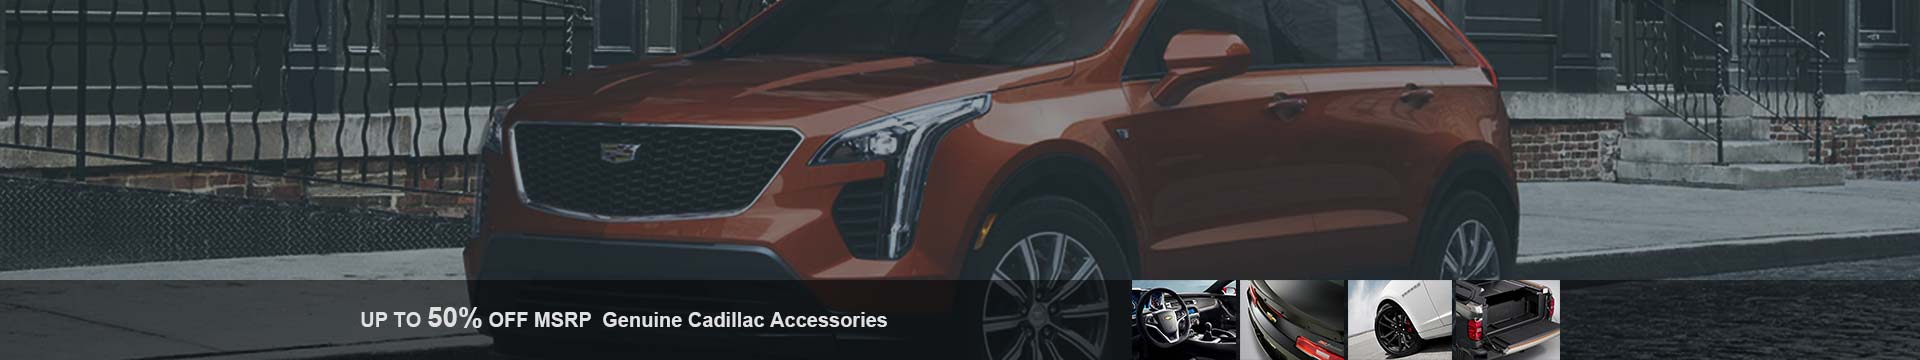 Shop Cadillac accessories with lowest prices